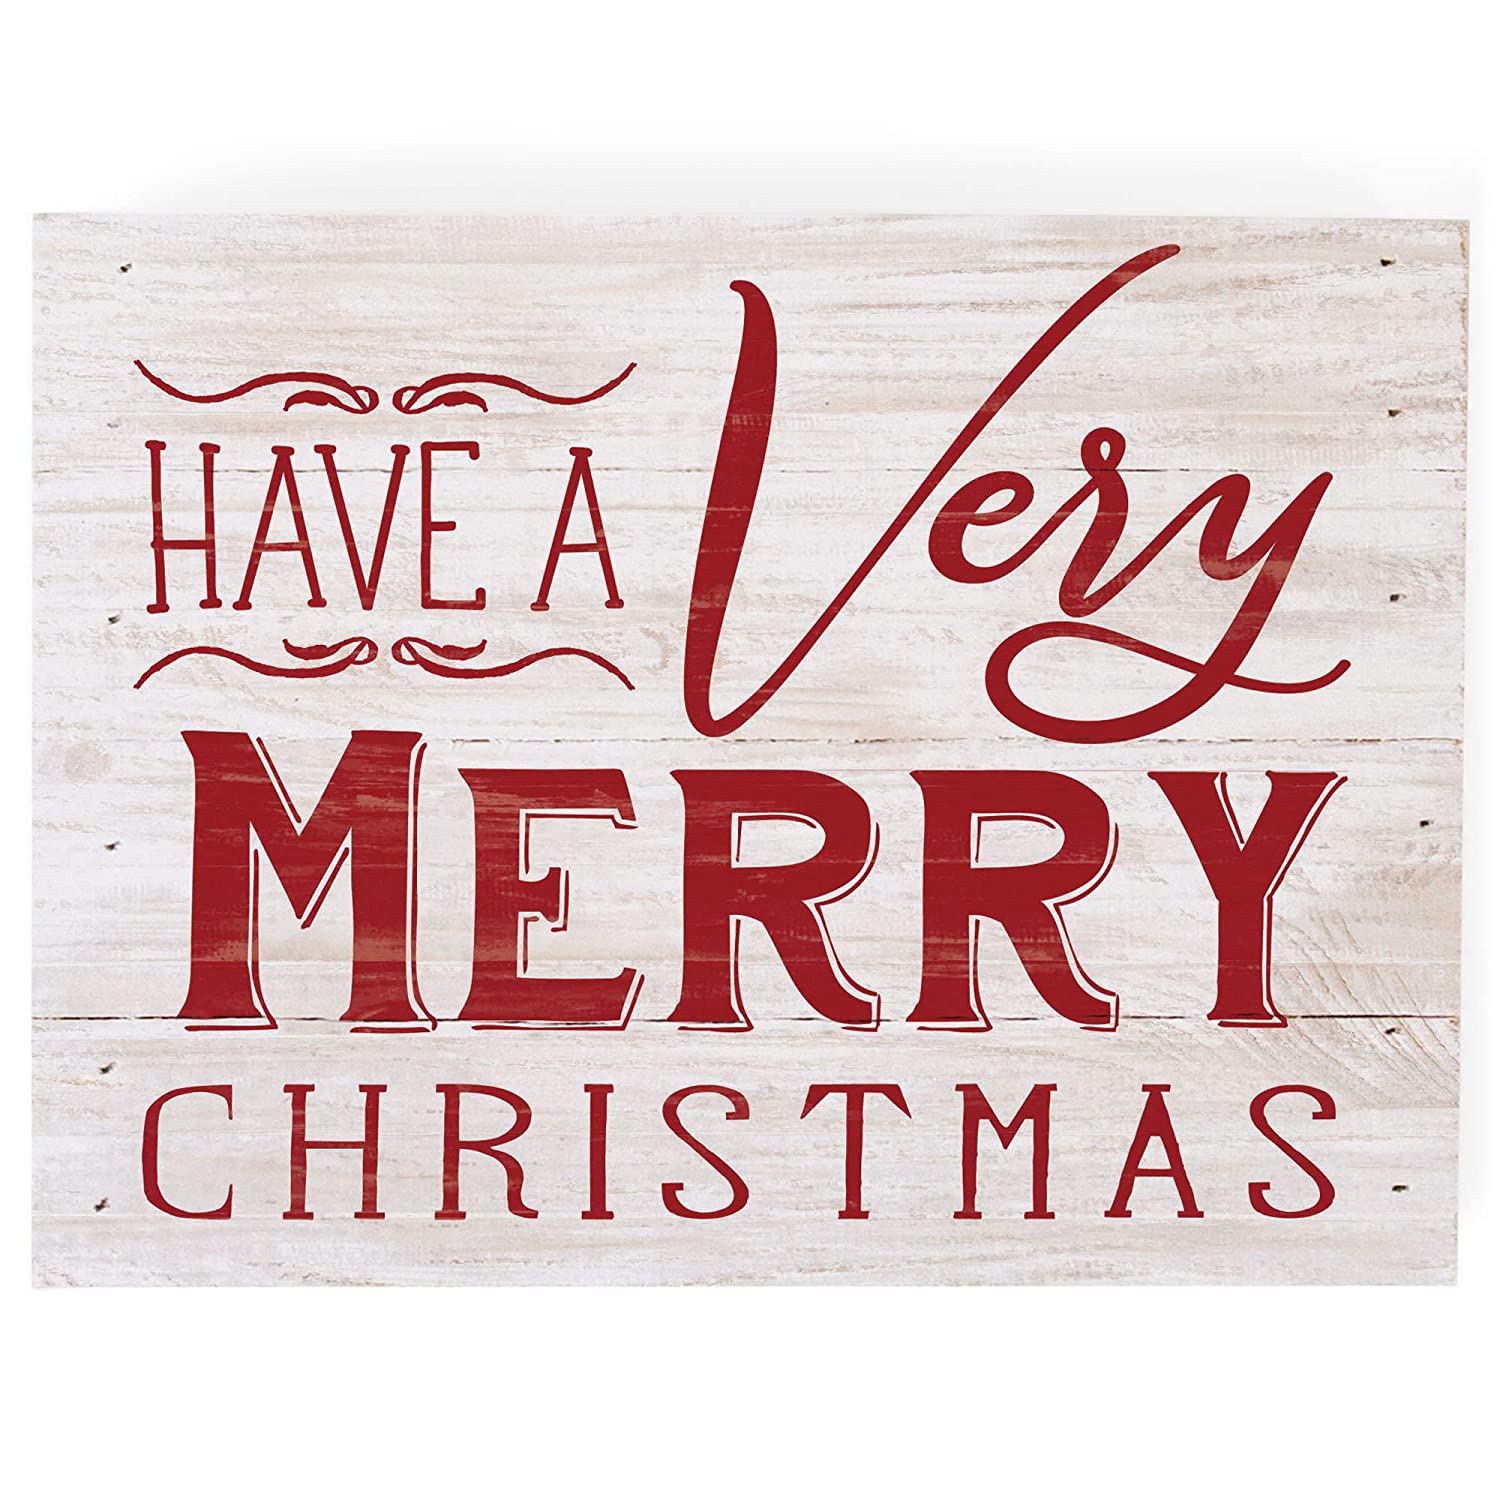 "Have a Very Merry Christmas" Wooden Art